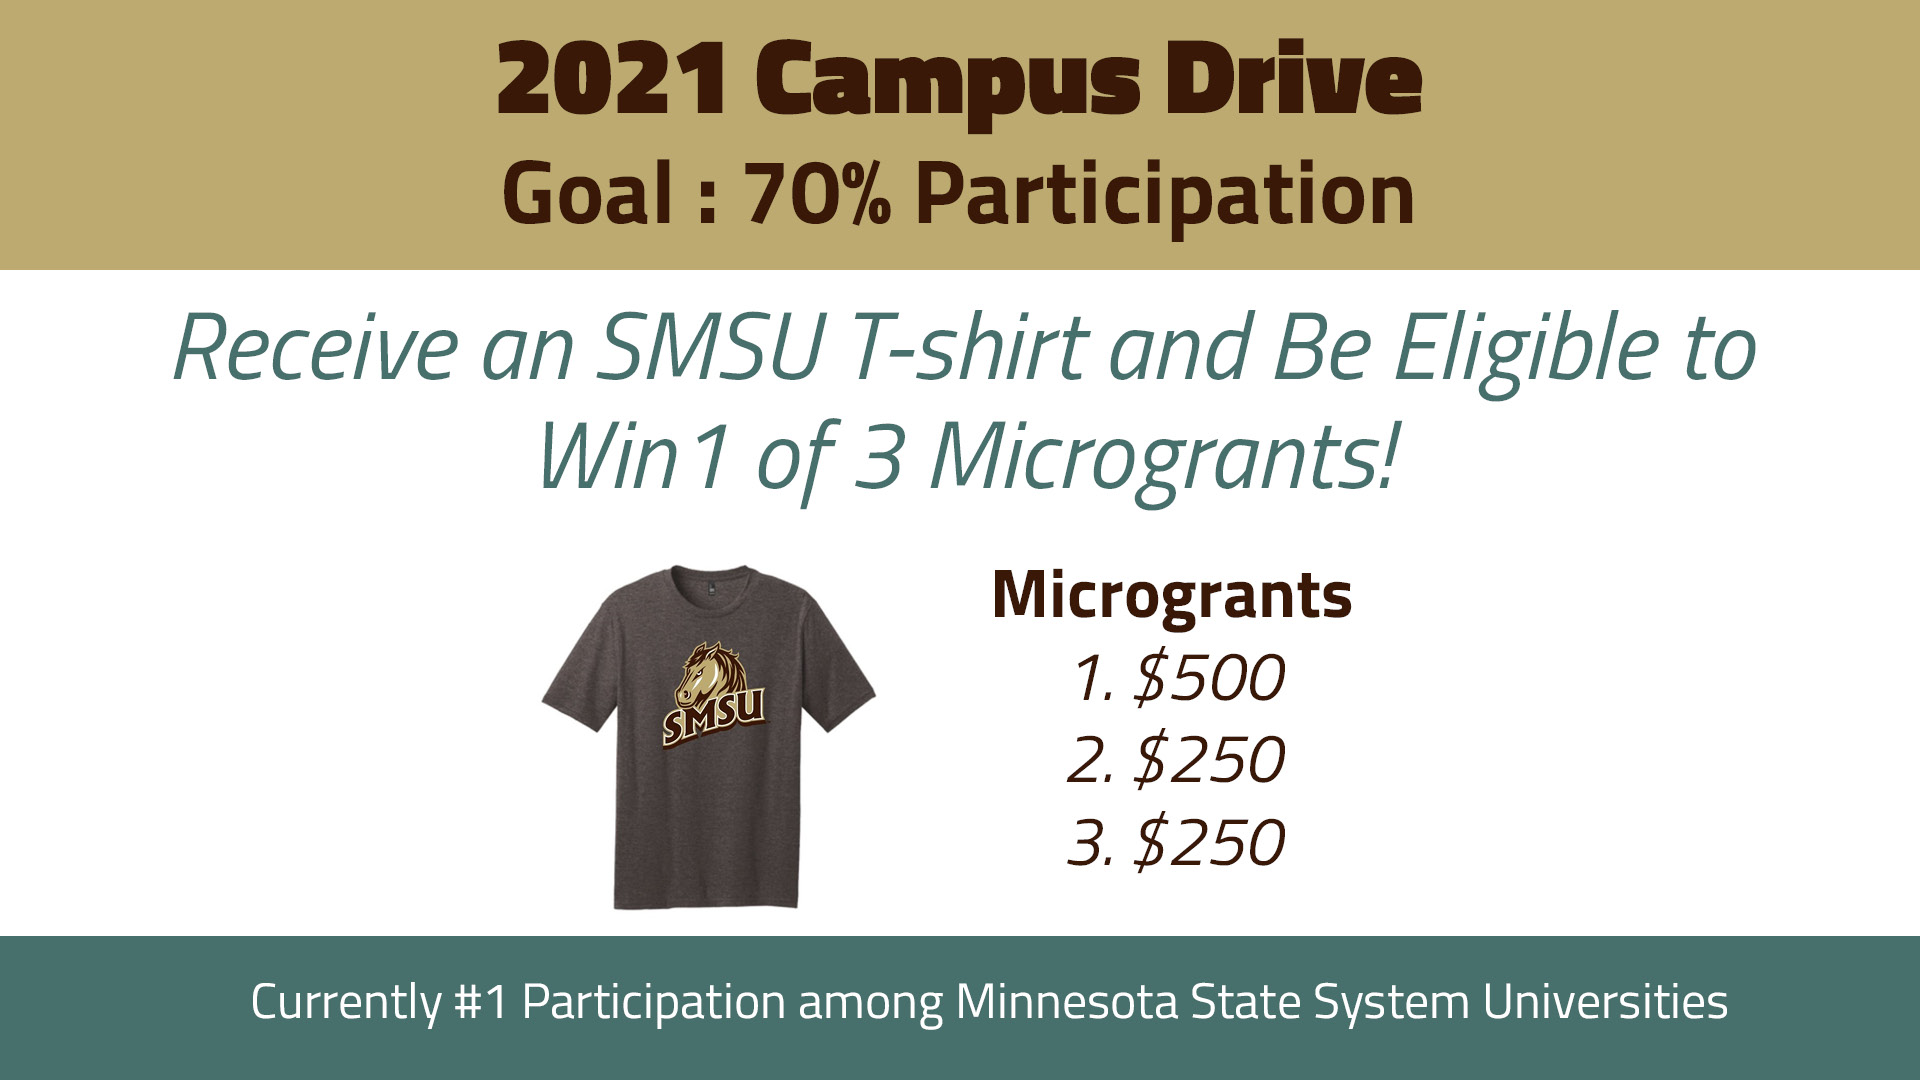 2021 Campus Drive - Goal: 70% Participation - Receive an SMSU T-Shirt and Be Eligible to Win 1 of 3 Microgrants